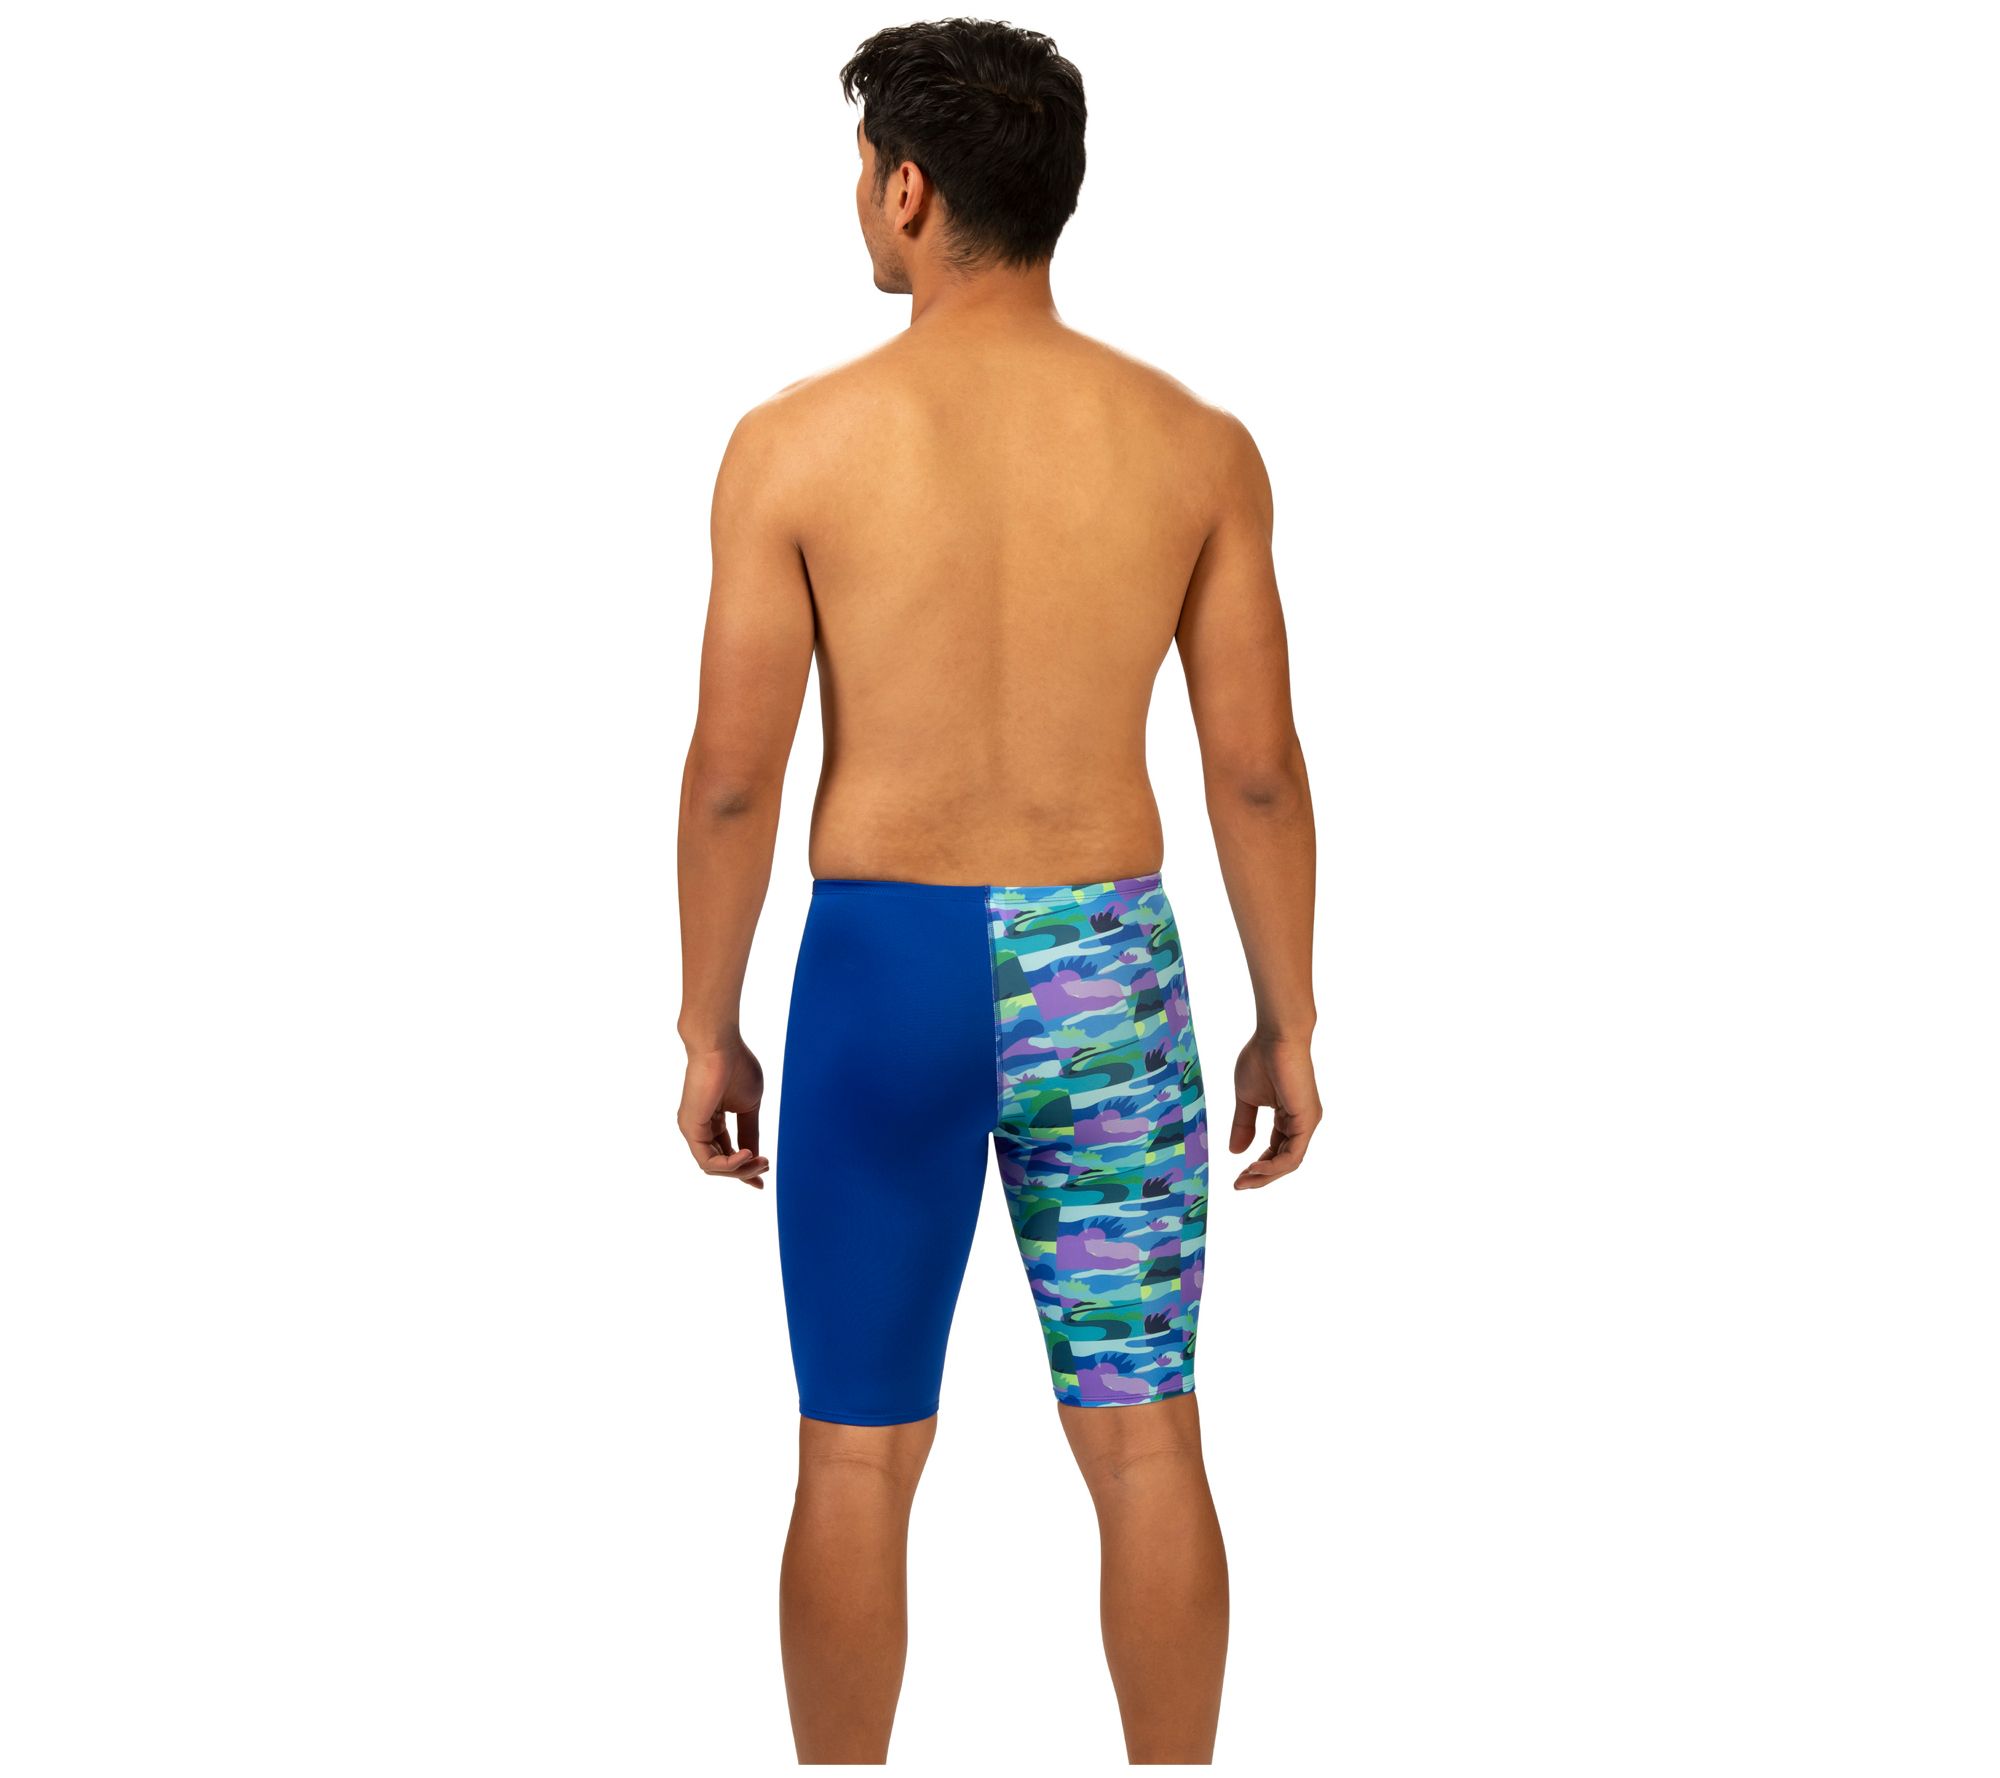 Details about   NEW DOLPHIN UGLIES MENS TRAINING SWIMMING JAMMERS SIZE 38 AURA F4/1201 